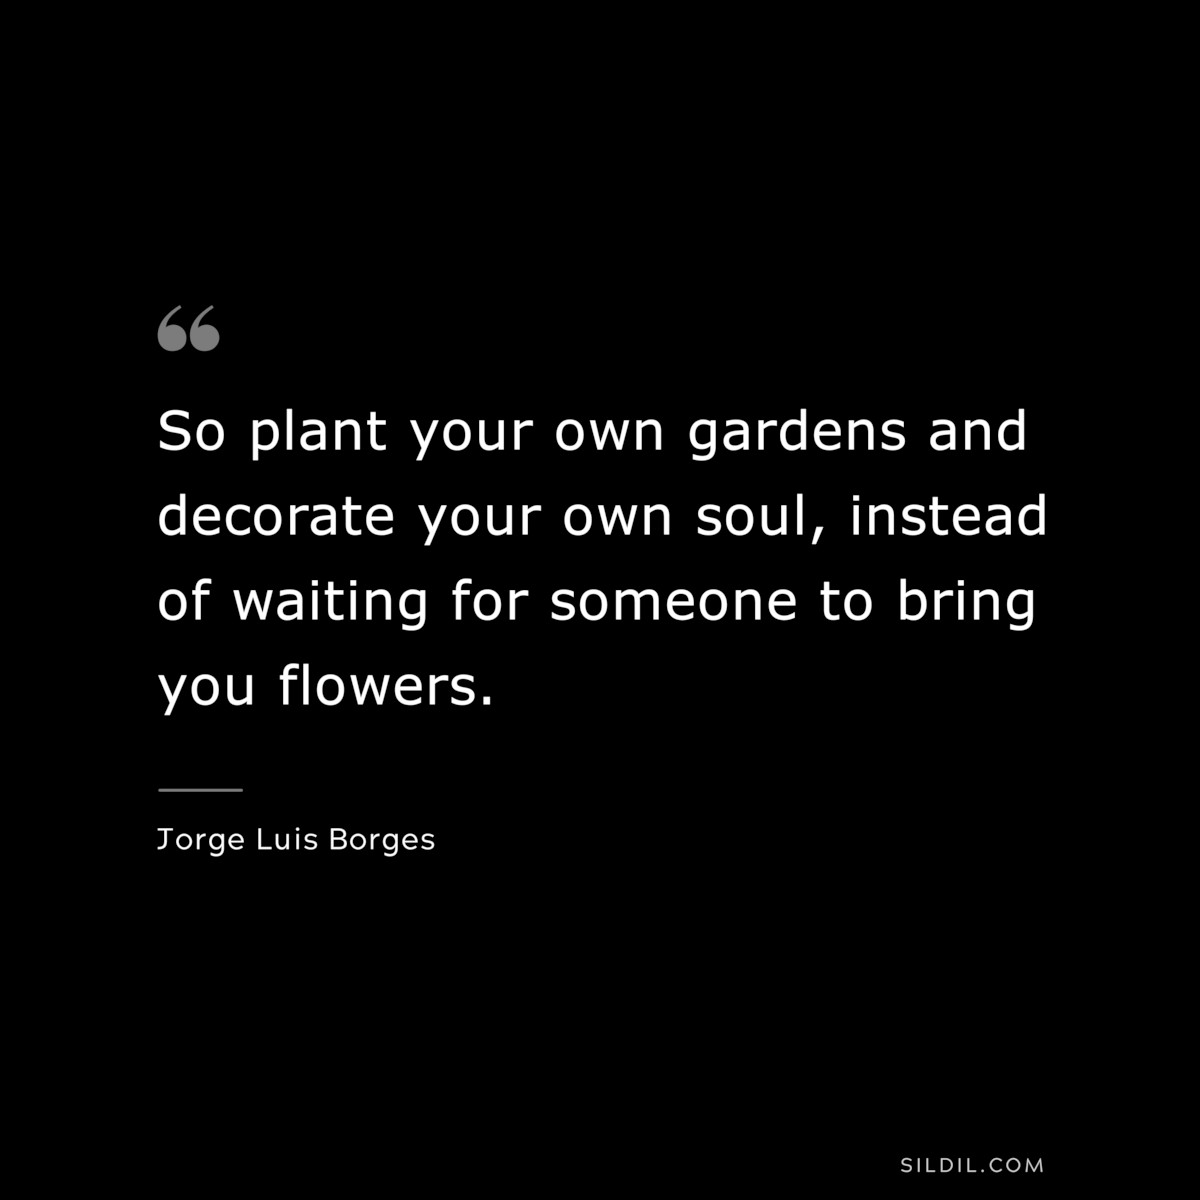 So plant your own gardens and decorate your own soul, instead of waiting for someone to bring you flowers. ― Jorge Luis Borges